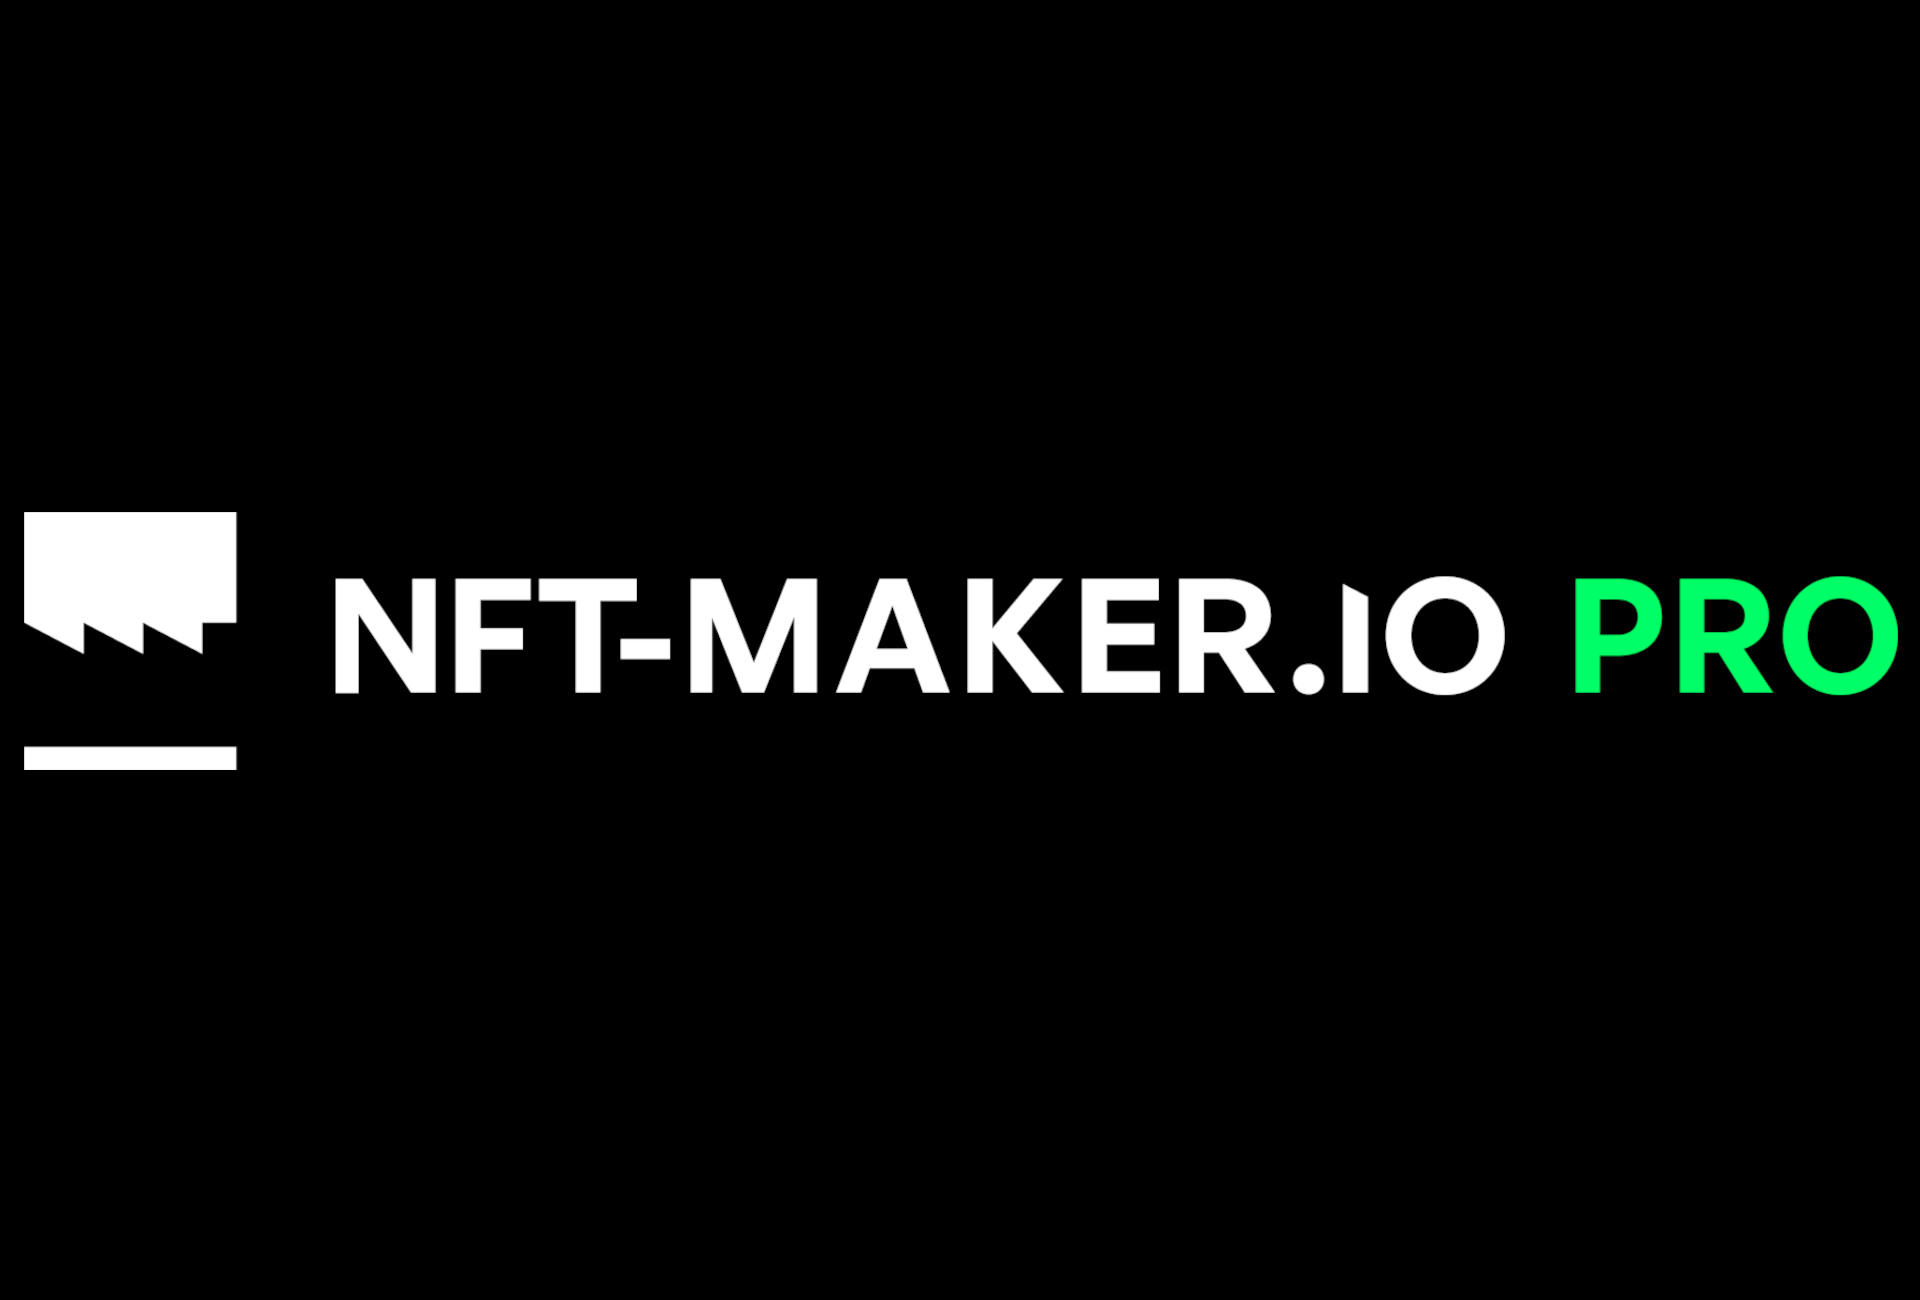 How to mint an NFT project on Cardano using NFT-MAKER